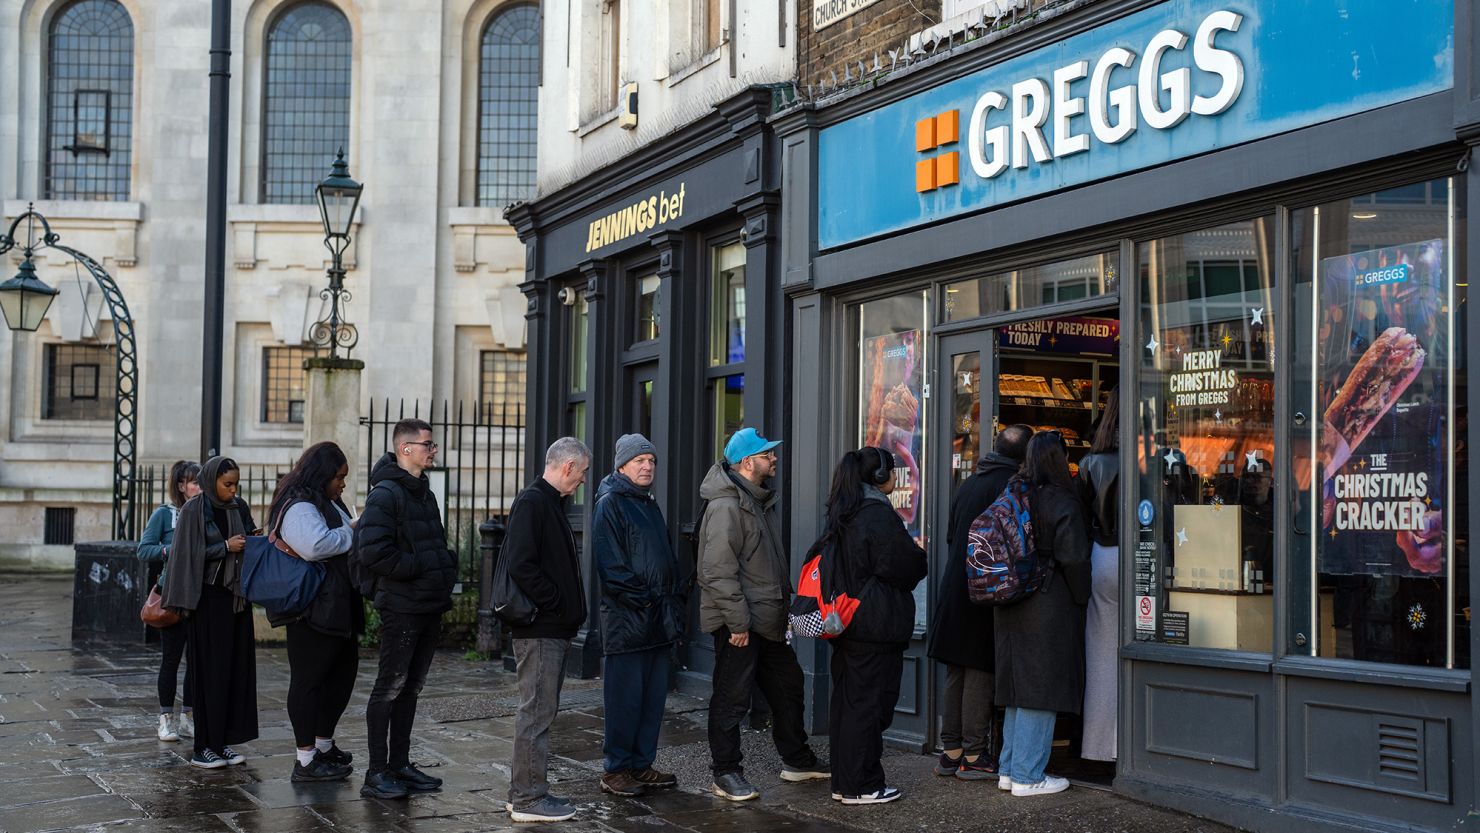 Full list of Primark stores where you can buy its Greggs clothing